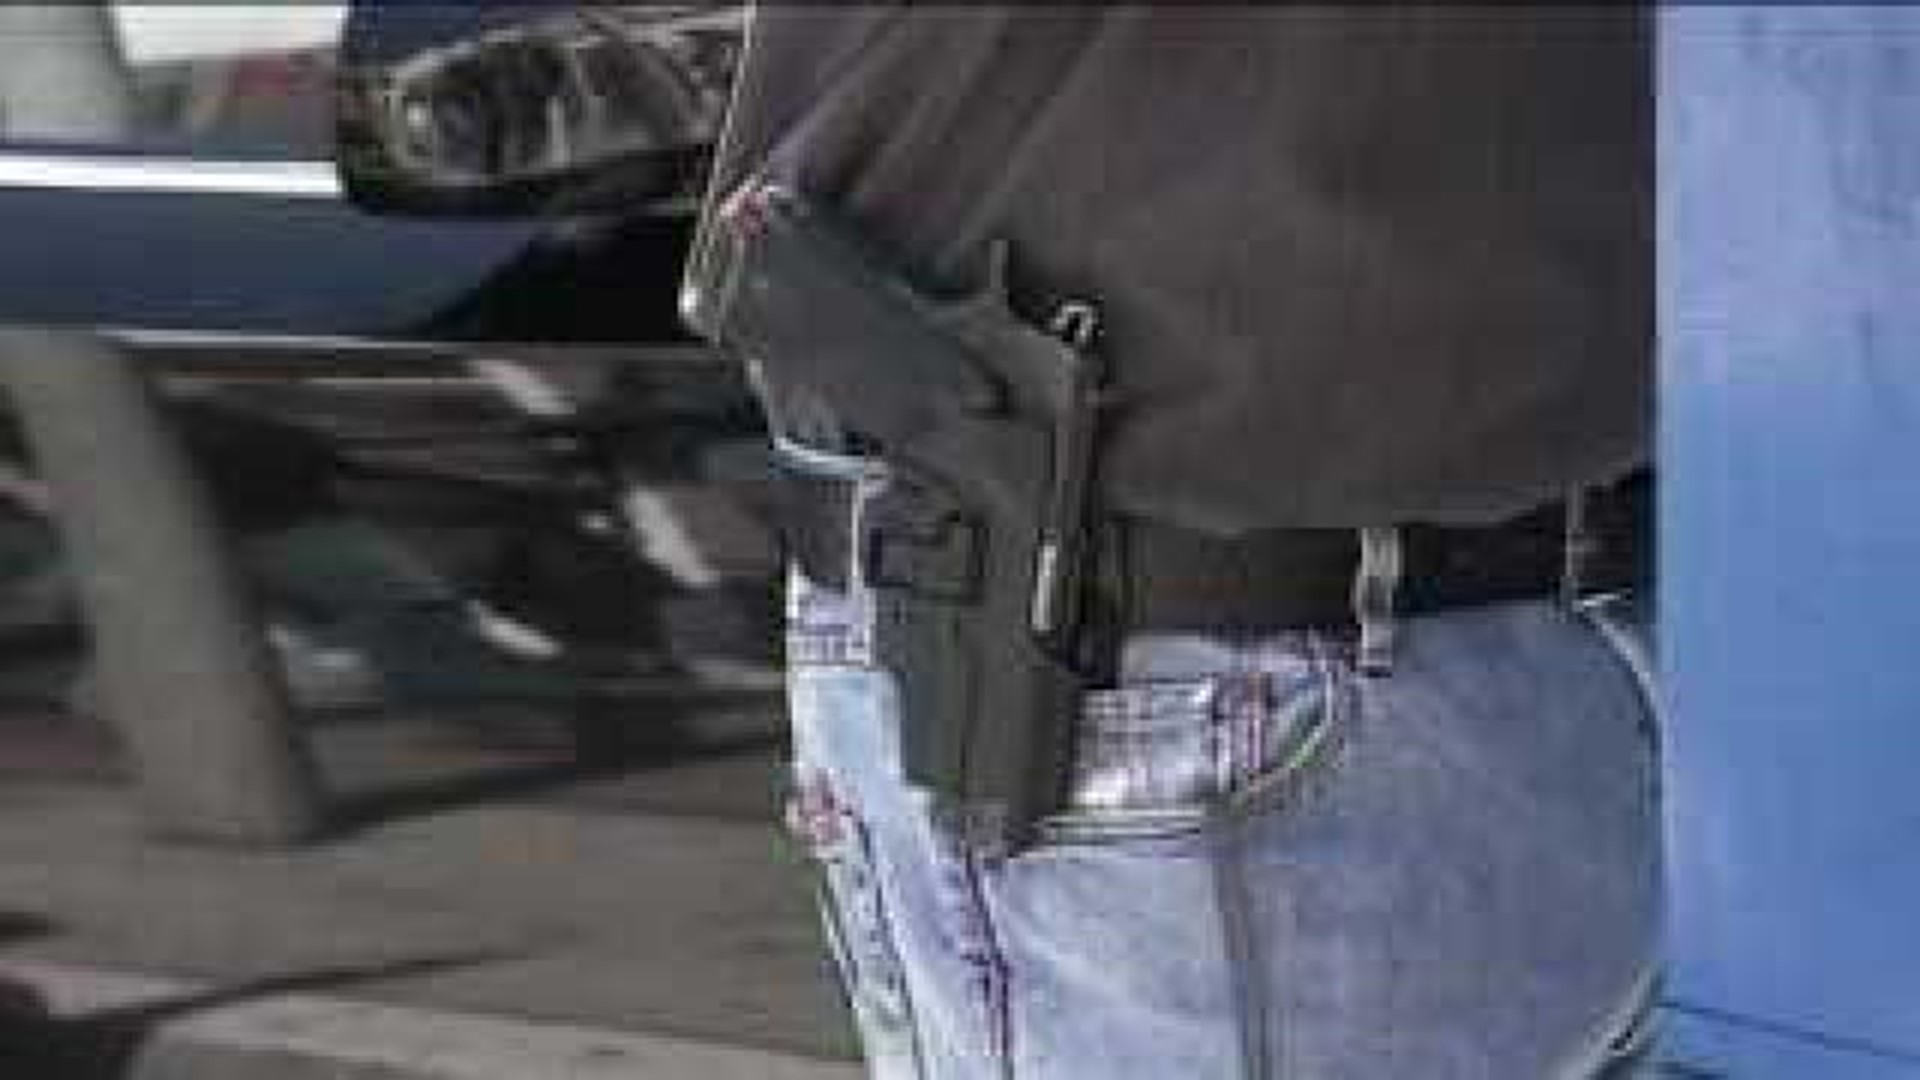 Local man suing over concealed gun permit rejection